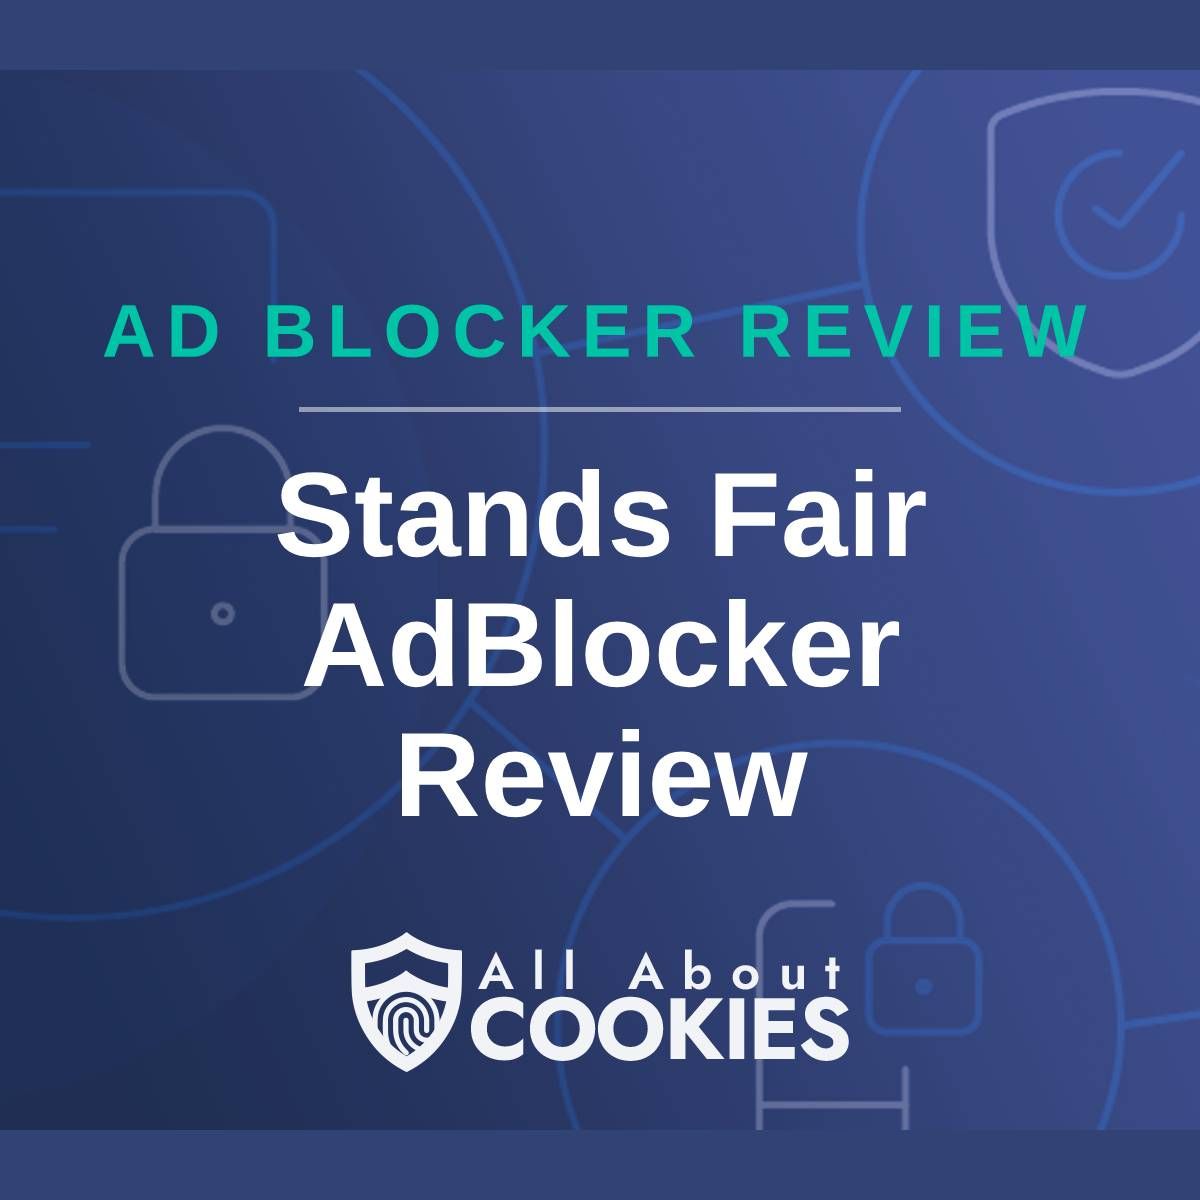 A blue background with images of locks and shields with the text "Ad Blocker Review Stands Fair AdBlocker Review" and the All About Cookies logo. 